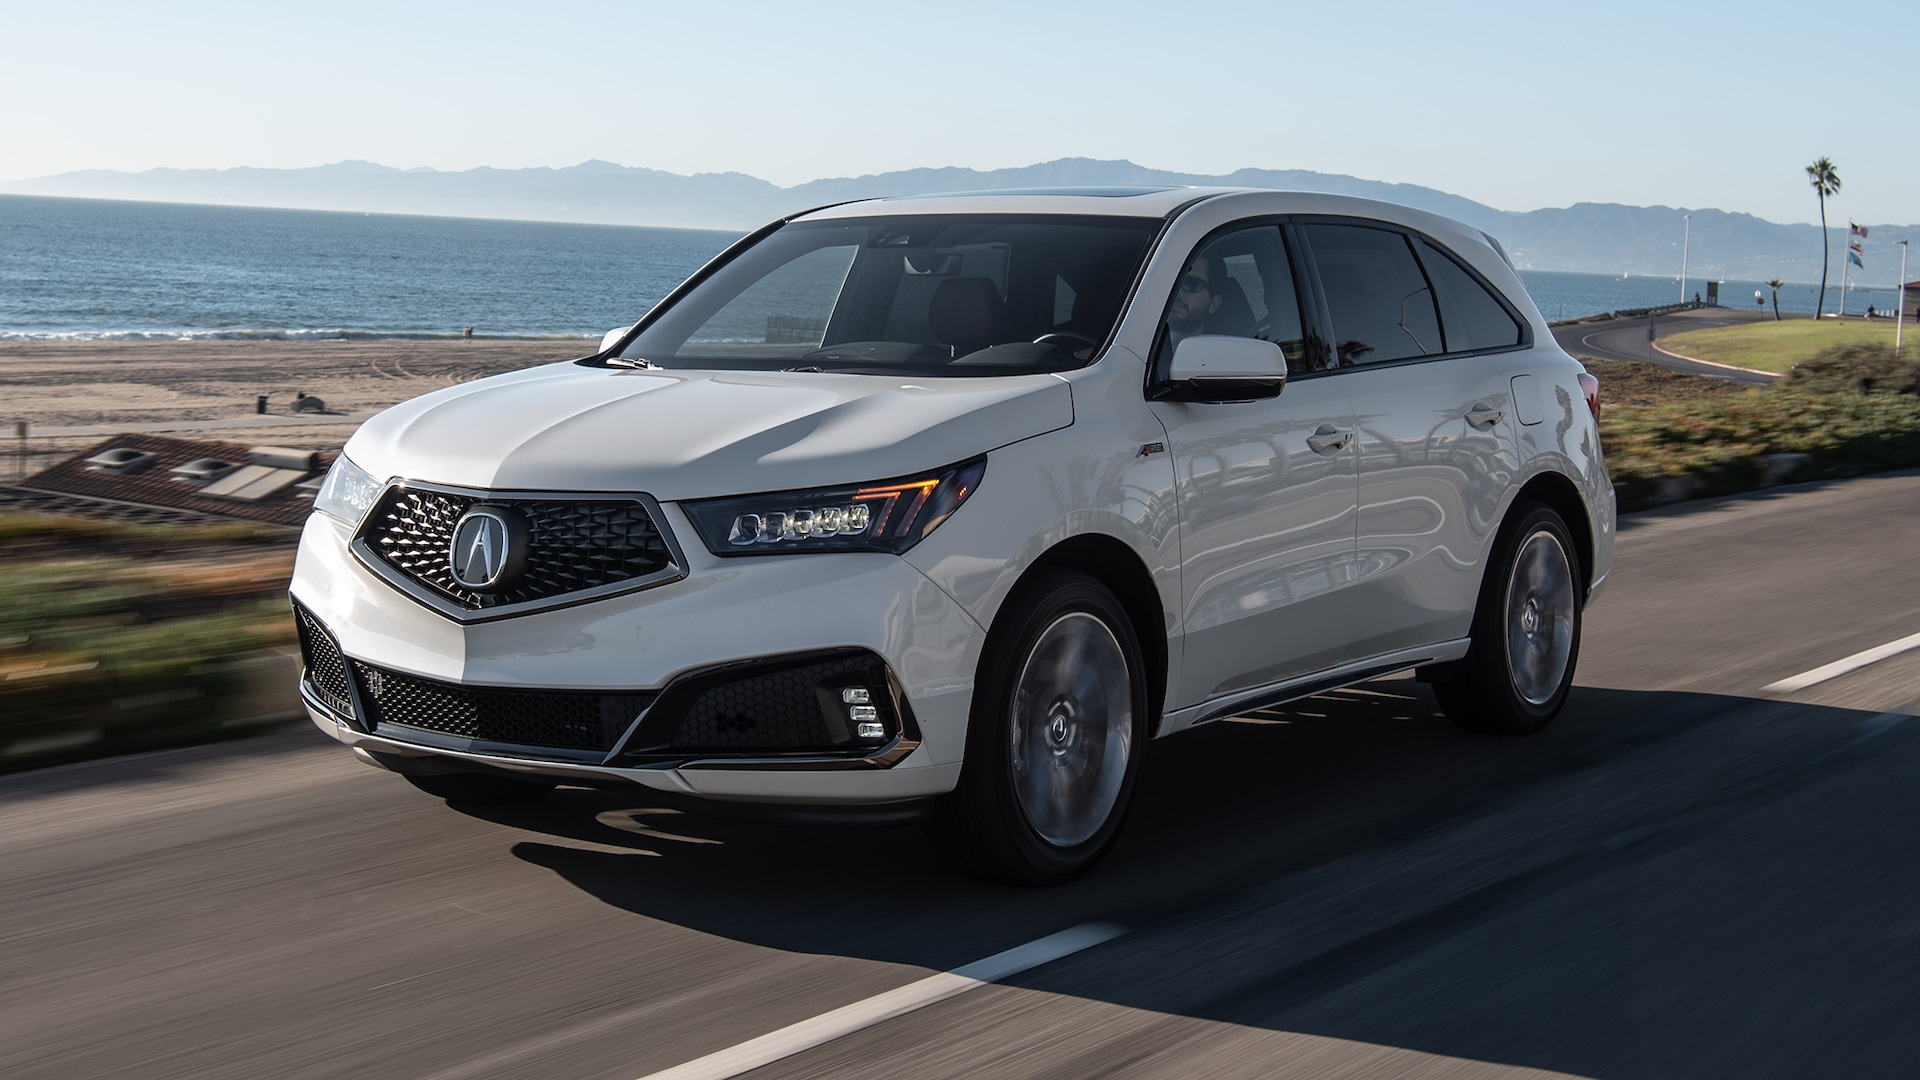 2019 Acura MDX A-Spec First Test: The Sport-Looking Option